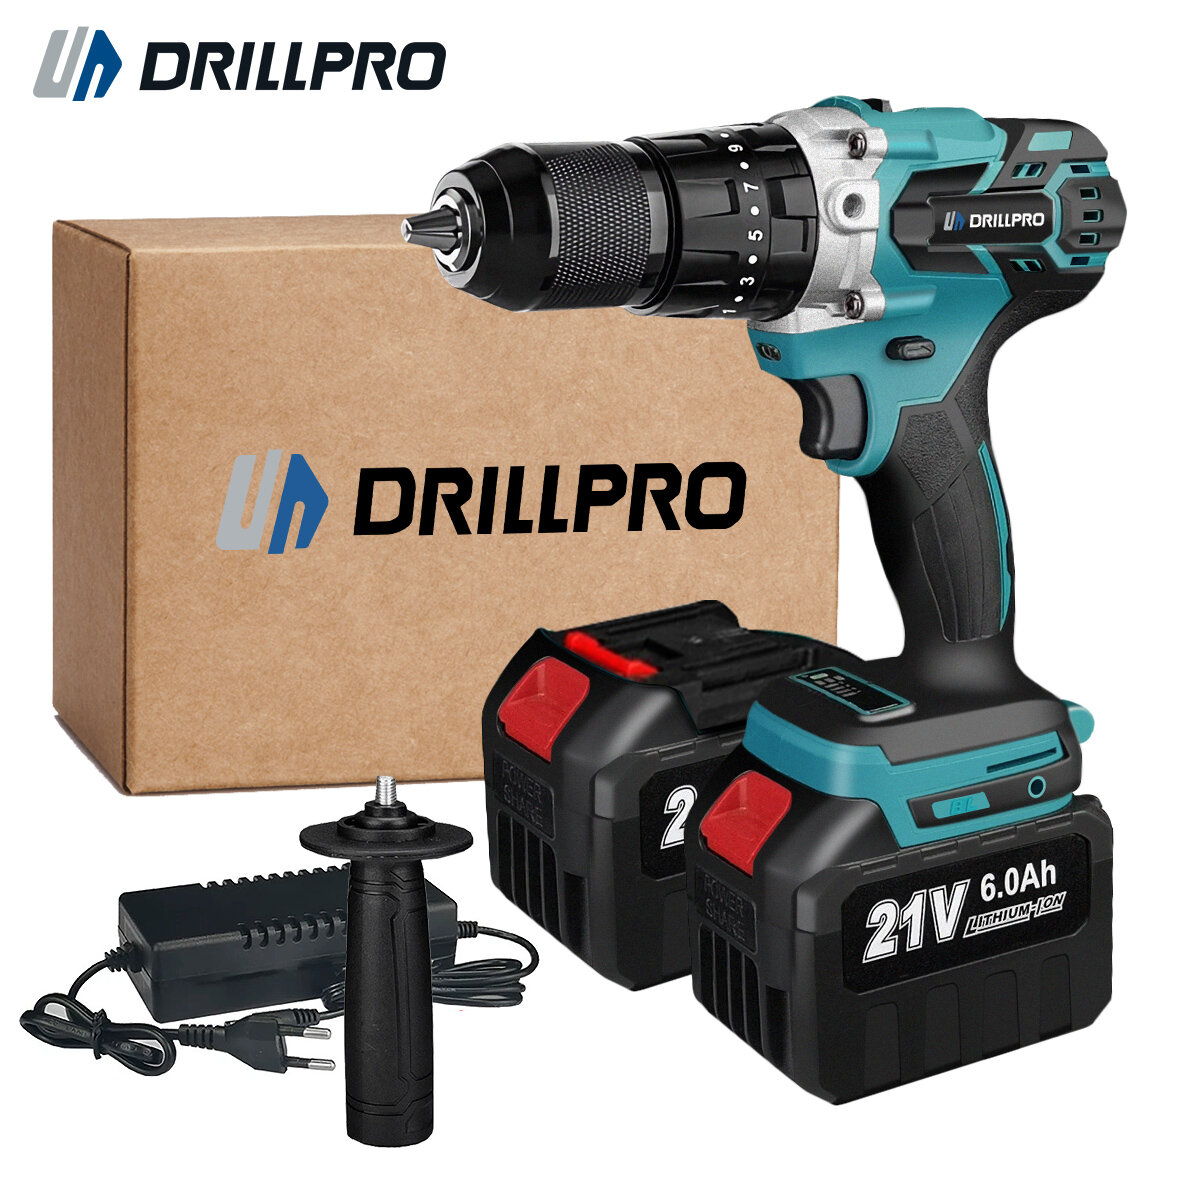 Drillpro 21V High Torque Brushless Electric Drill with 1/2